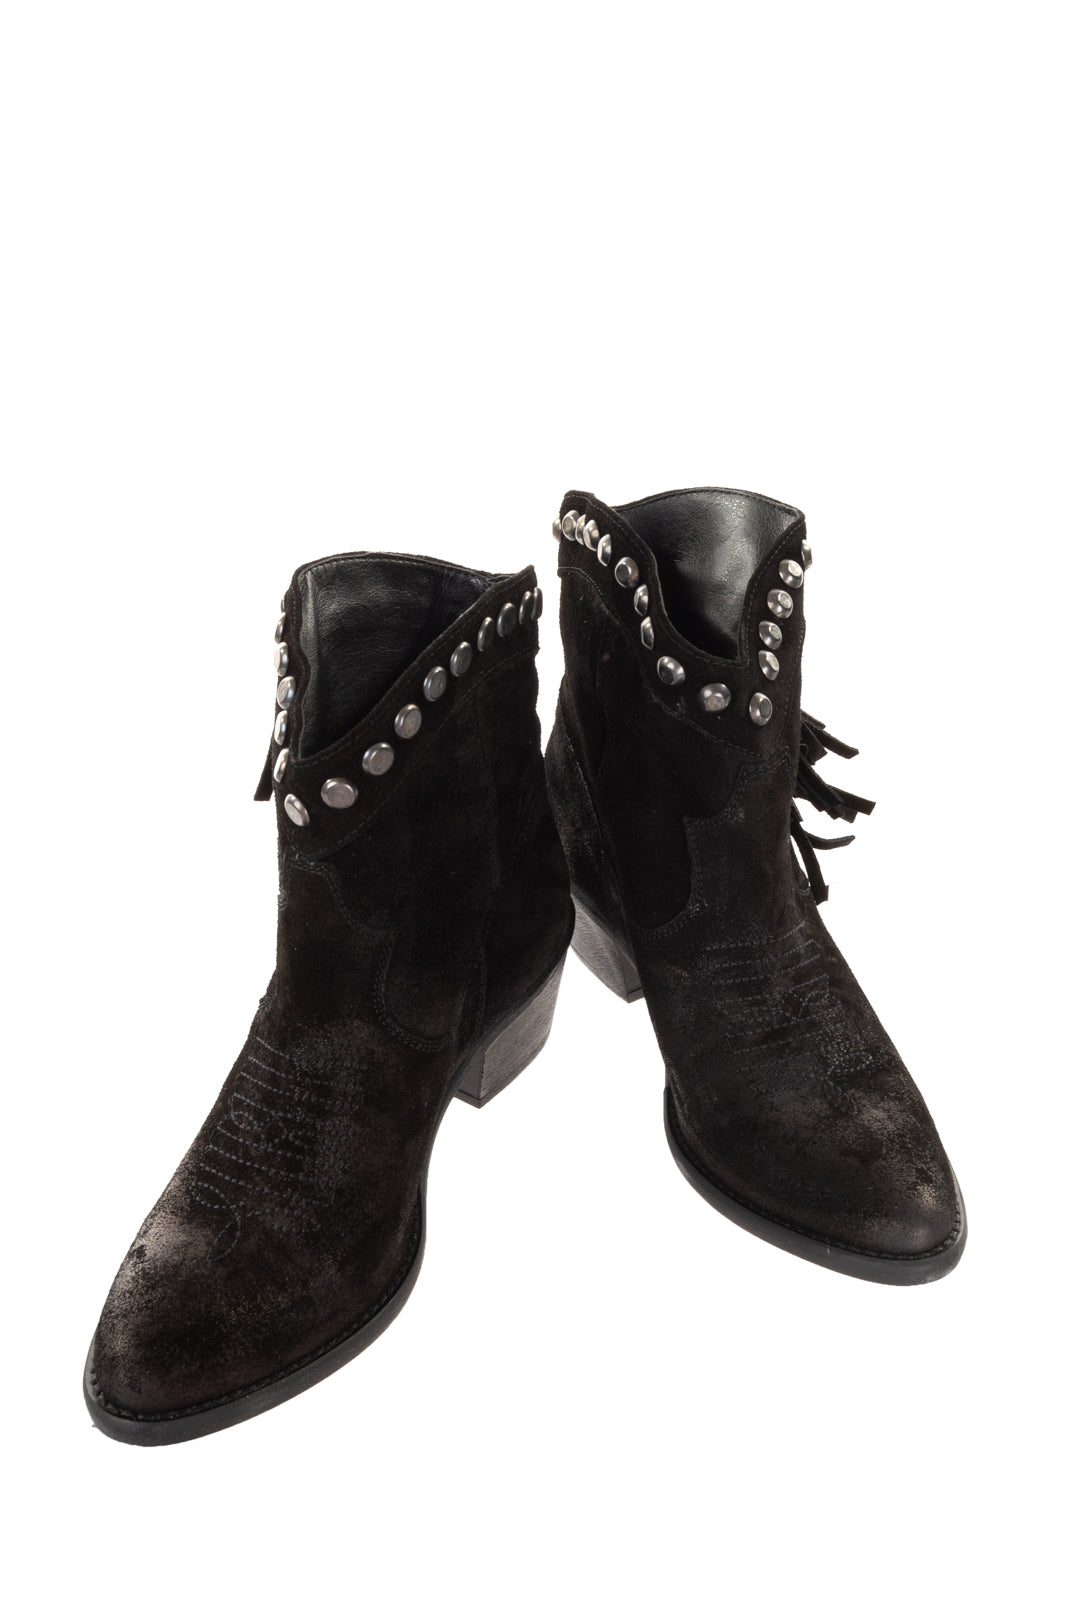 OVYE' By CRISTINA LUCCHI Leather Western Style Boots EU 37 UK 4 US 7 HANDMADE gallery main photo